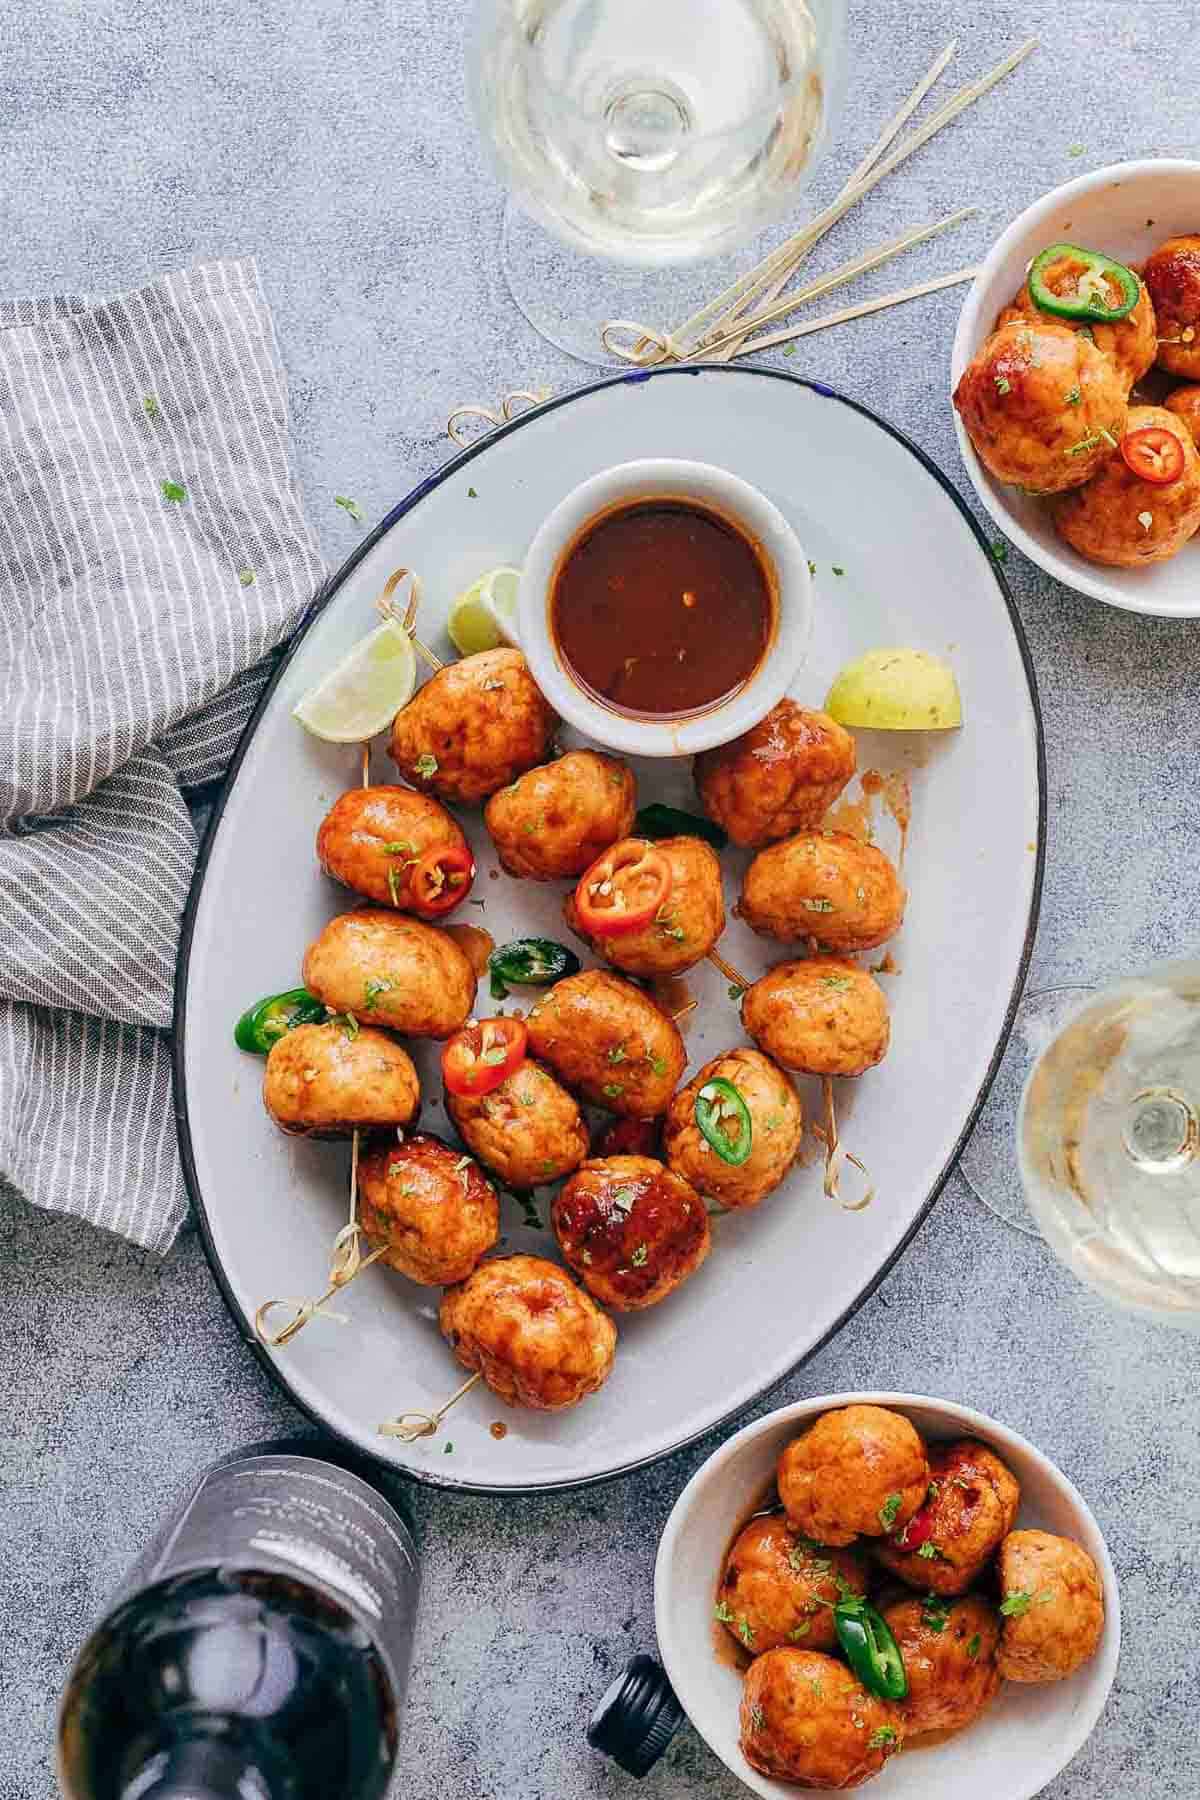 Baked firecracker chicken meatballs are juicy, spicy and saucy! This easy appetizer is perfect for holiday parties. Each meatball is super tender and full of flavour.